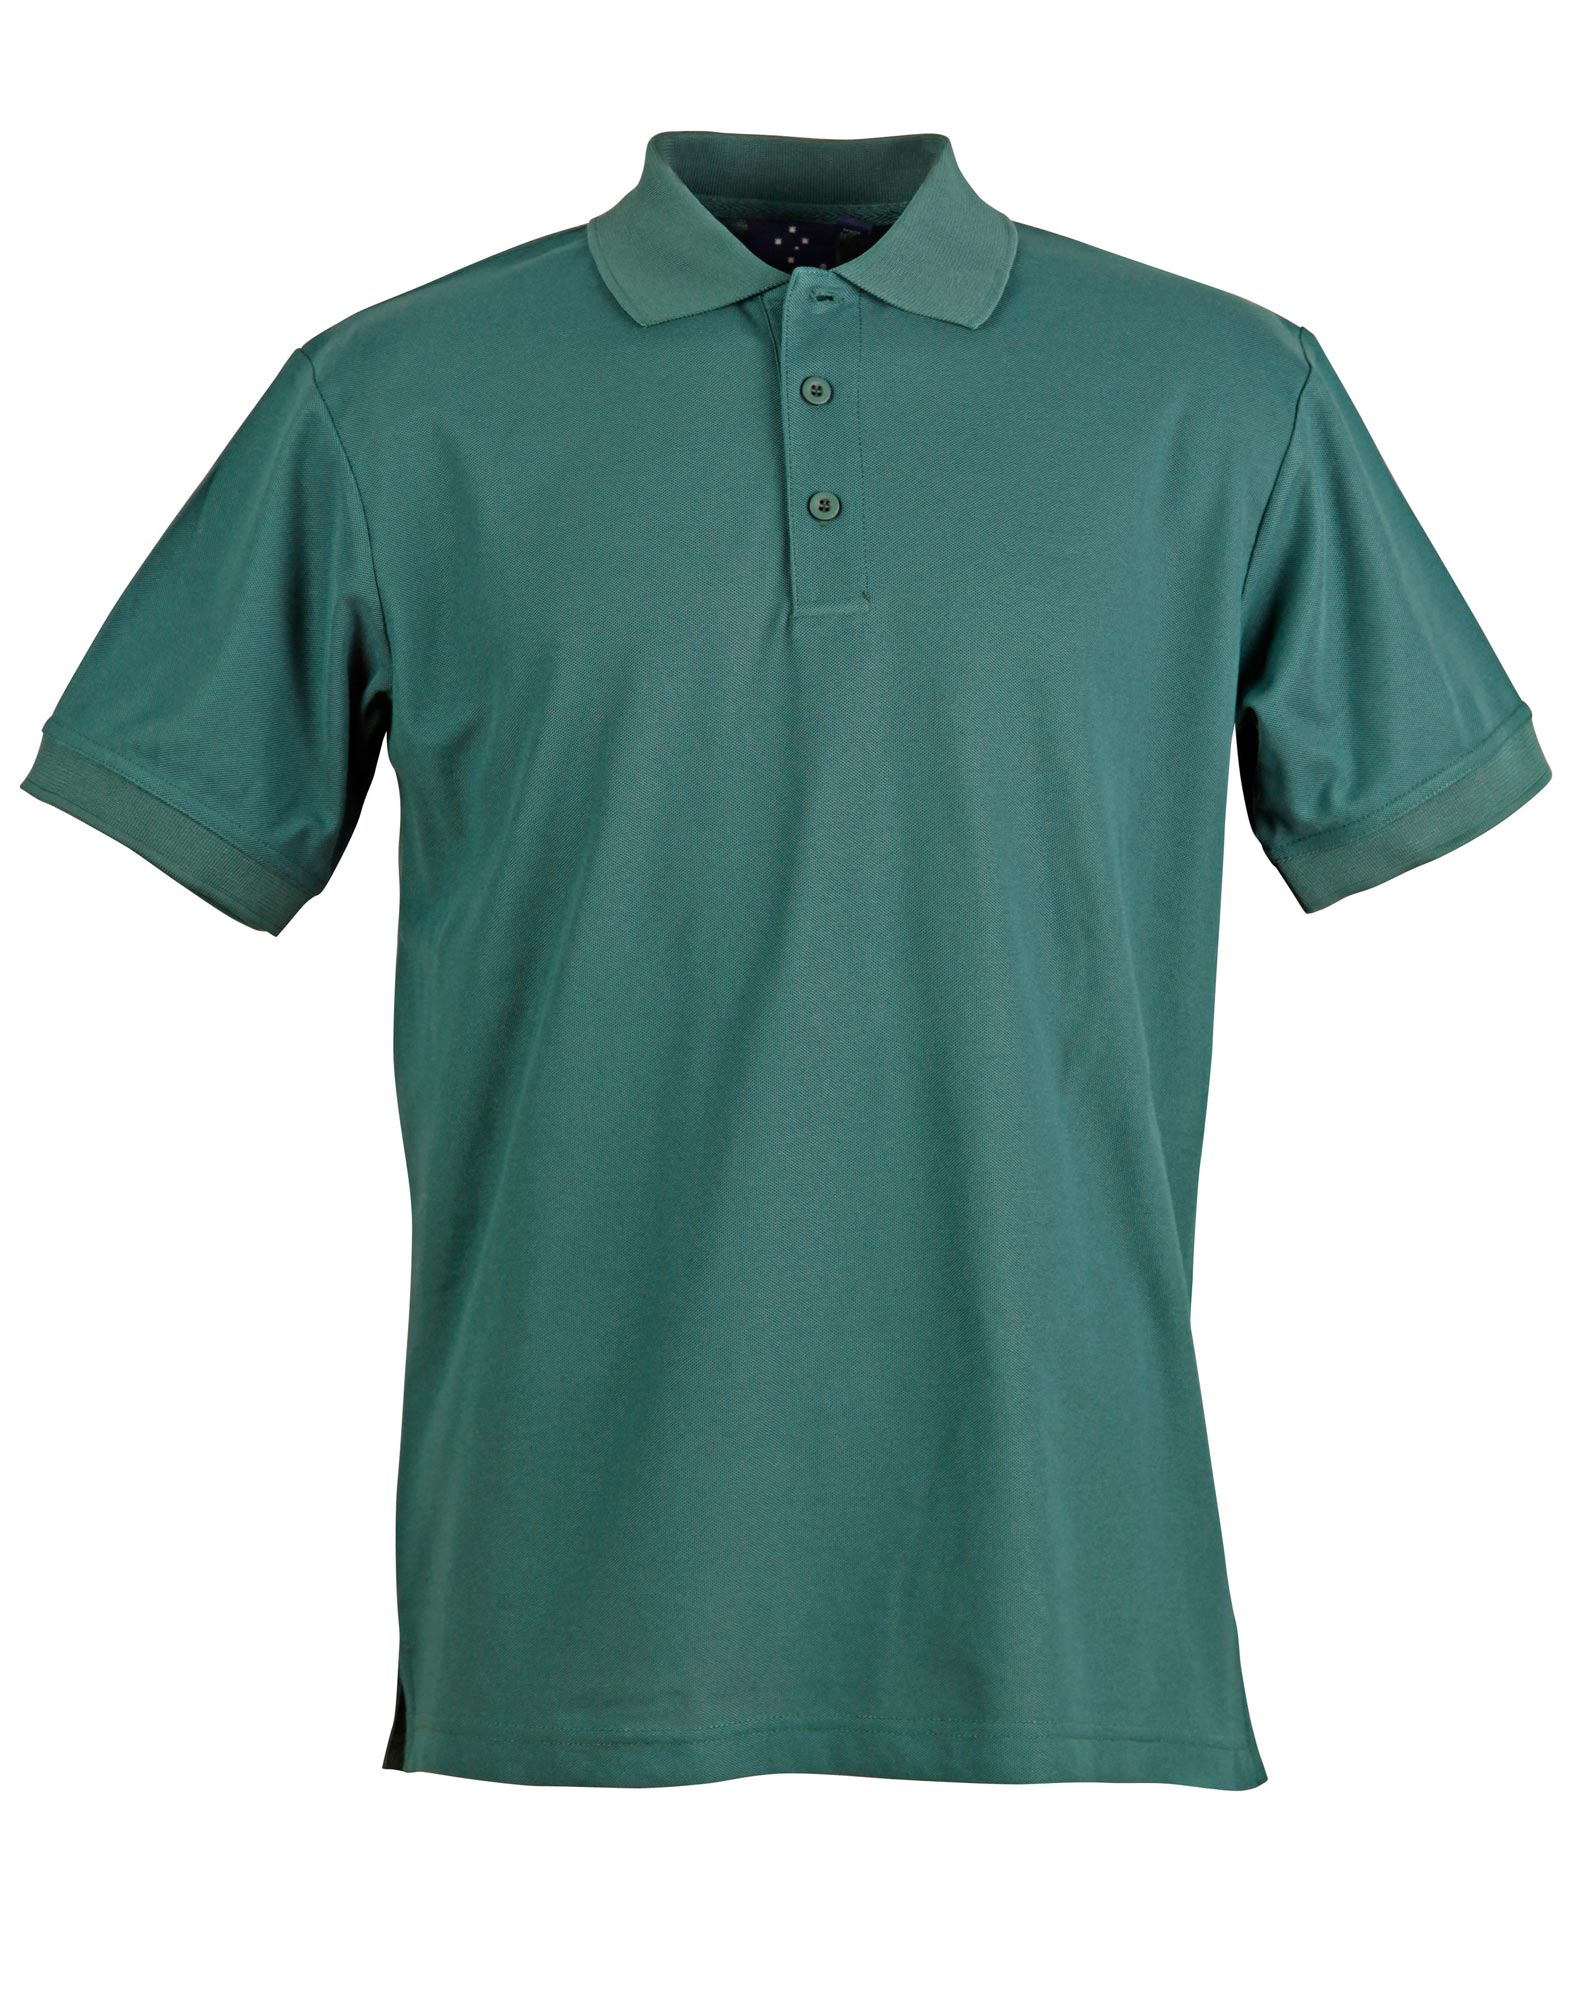 Truedry Short Sleeve Polo - made by AIW